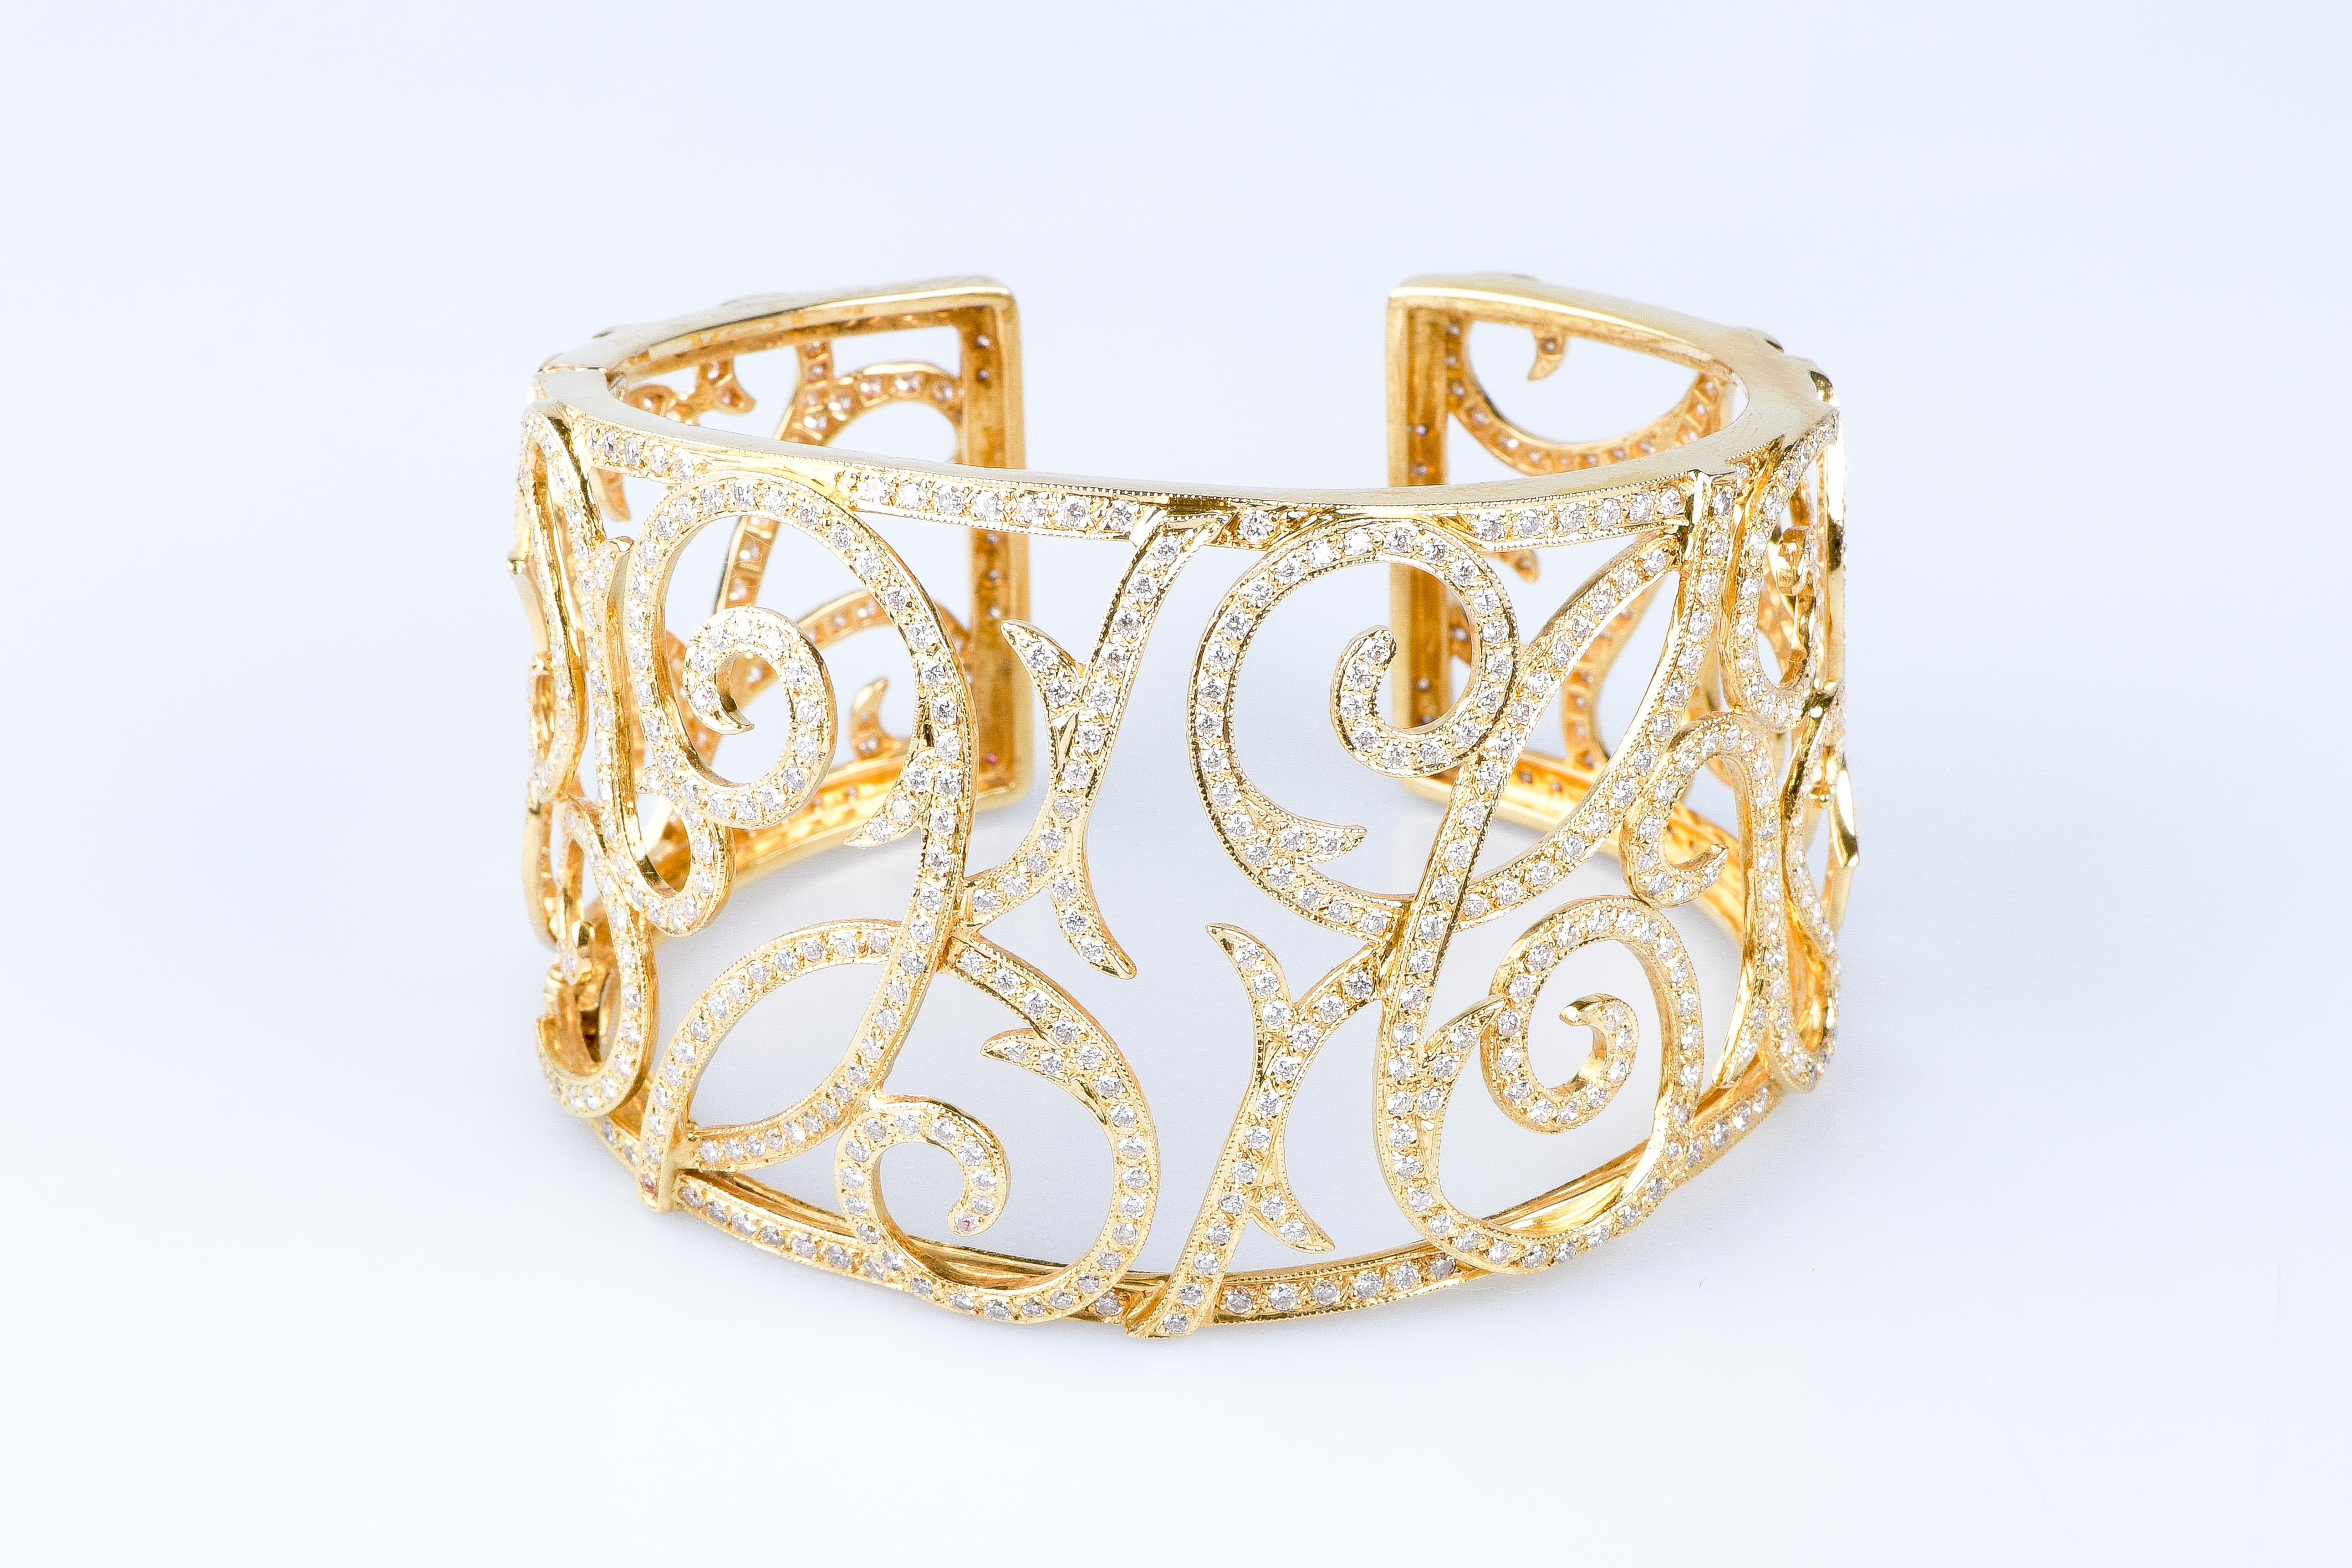 Beautiful Haute Joaillerie 18 carat yellow gold bracelet designed with 667 round brillant cut diamonds weighing 6.70 carat.

Quality of the diamond
Color : G - H
Clarity : VS - SI

Weight: 56.10 gr. 

Dimensions : 16  x 4.35 cm

Jewel delivered with